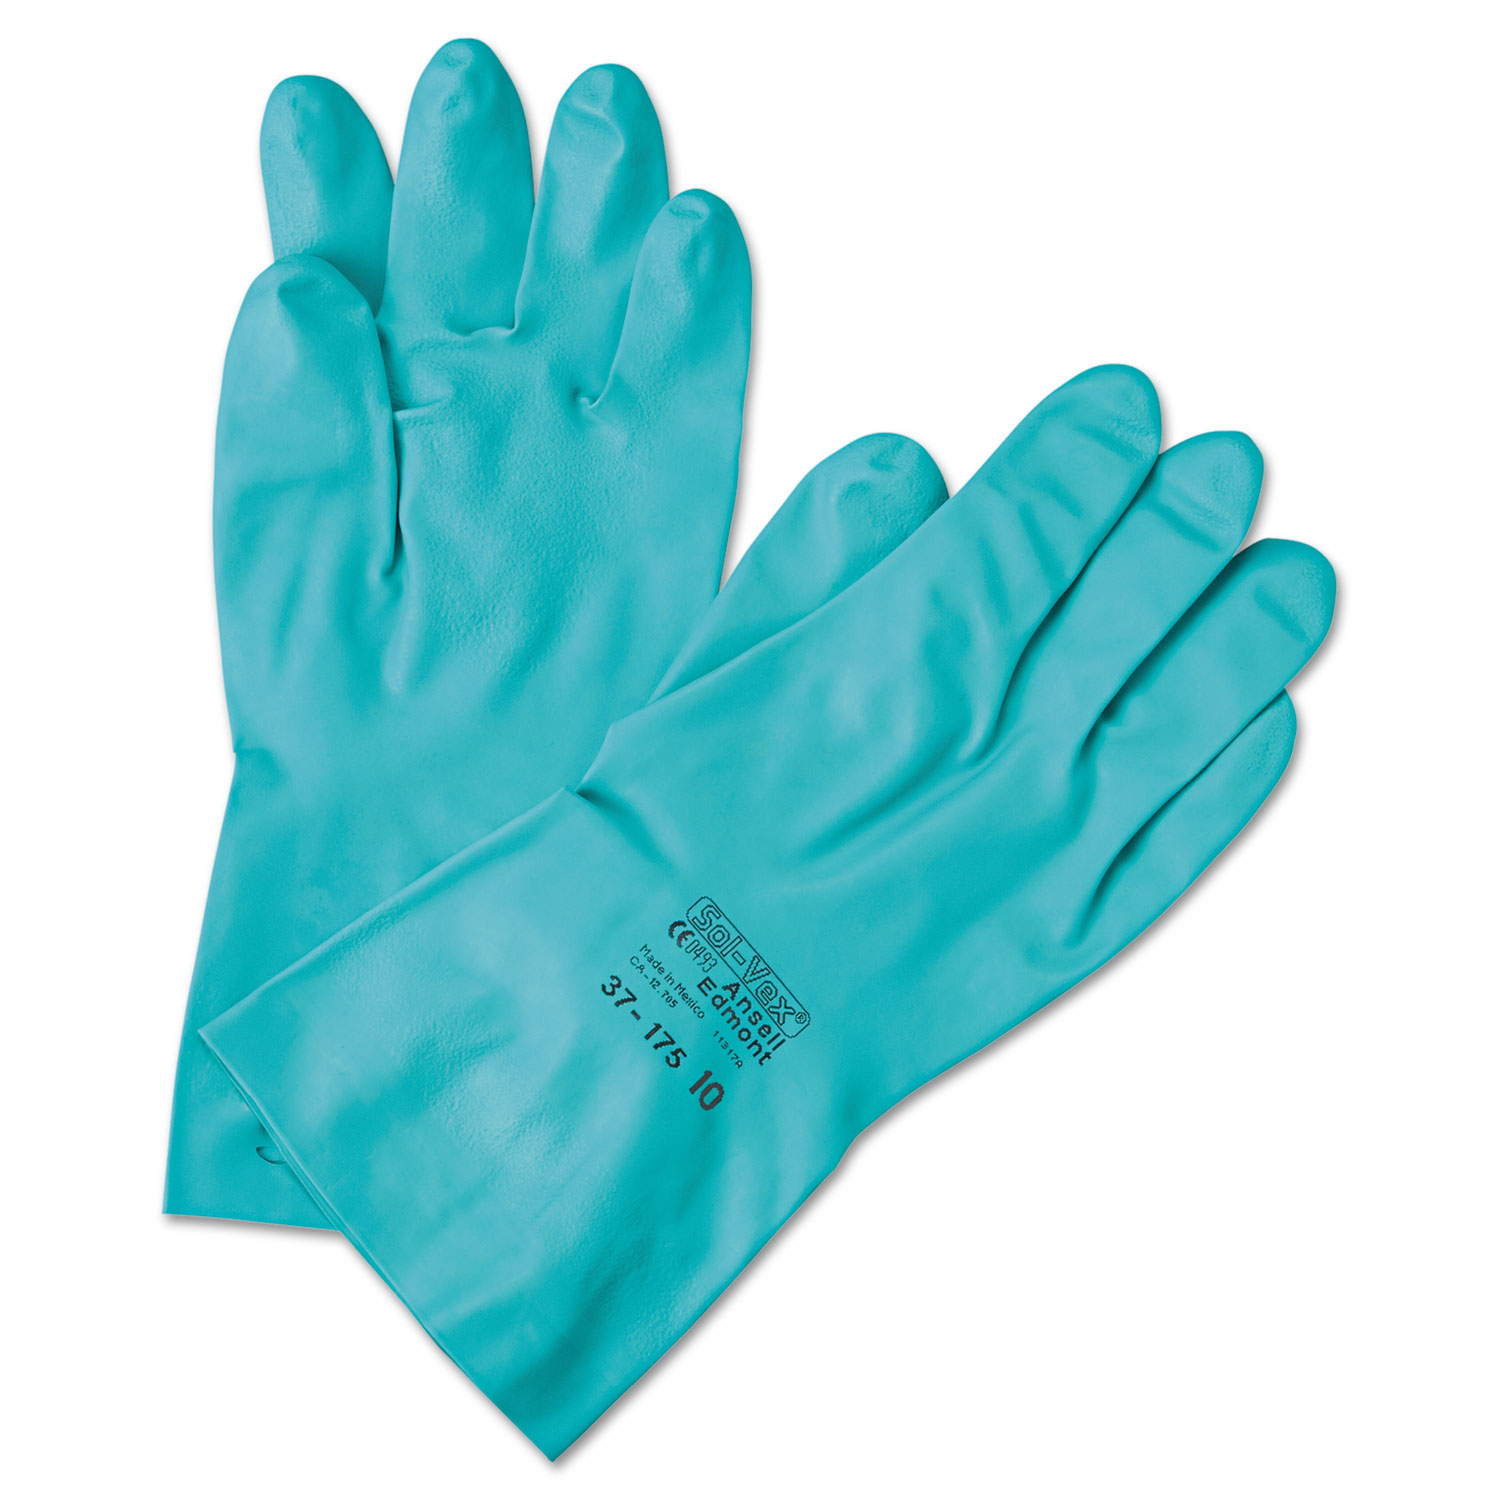  AnsellPro 102943 Sol-Vex Sandpatch-Grip Nitrile Gloves, Green, Size 7 (ANS371857) 